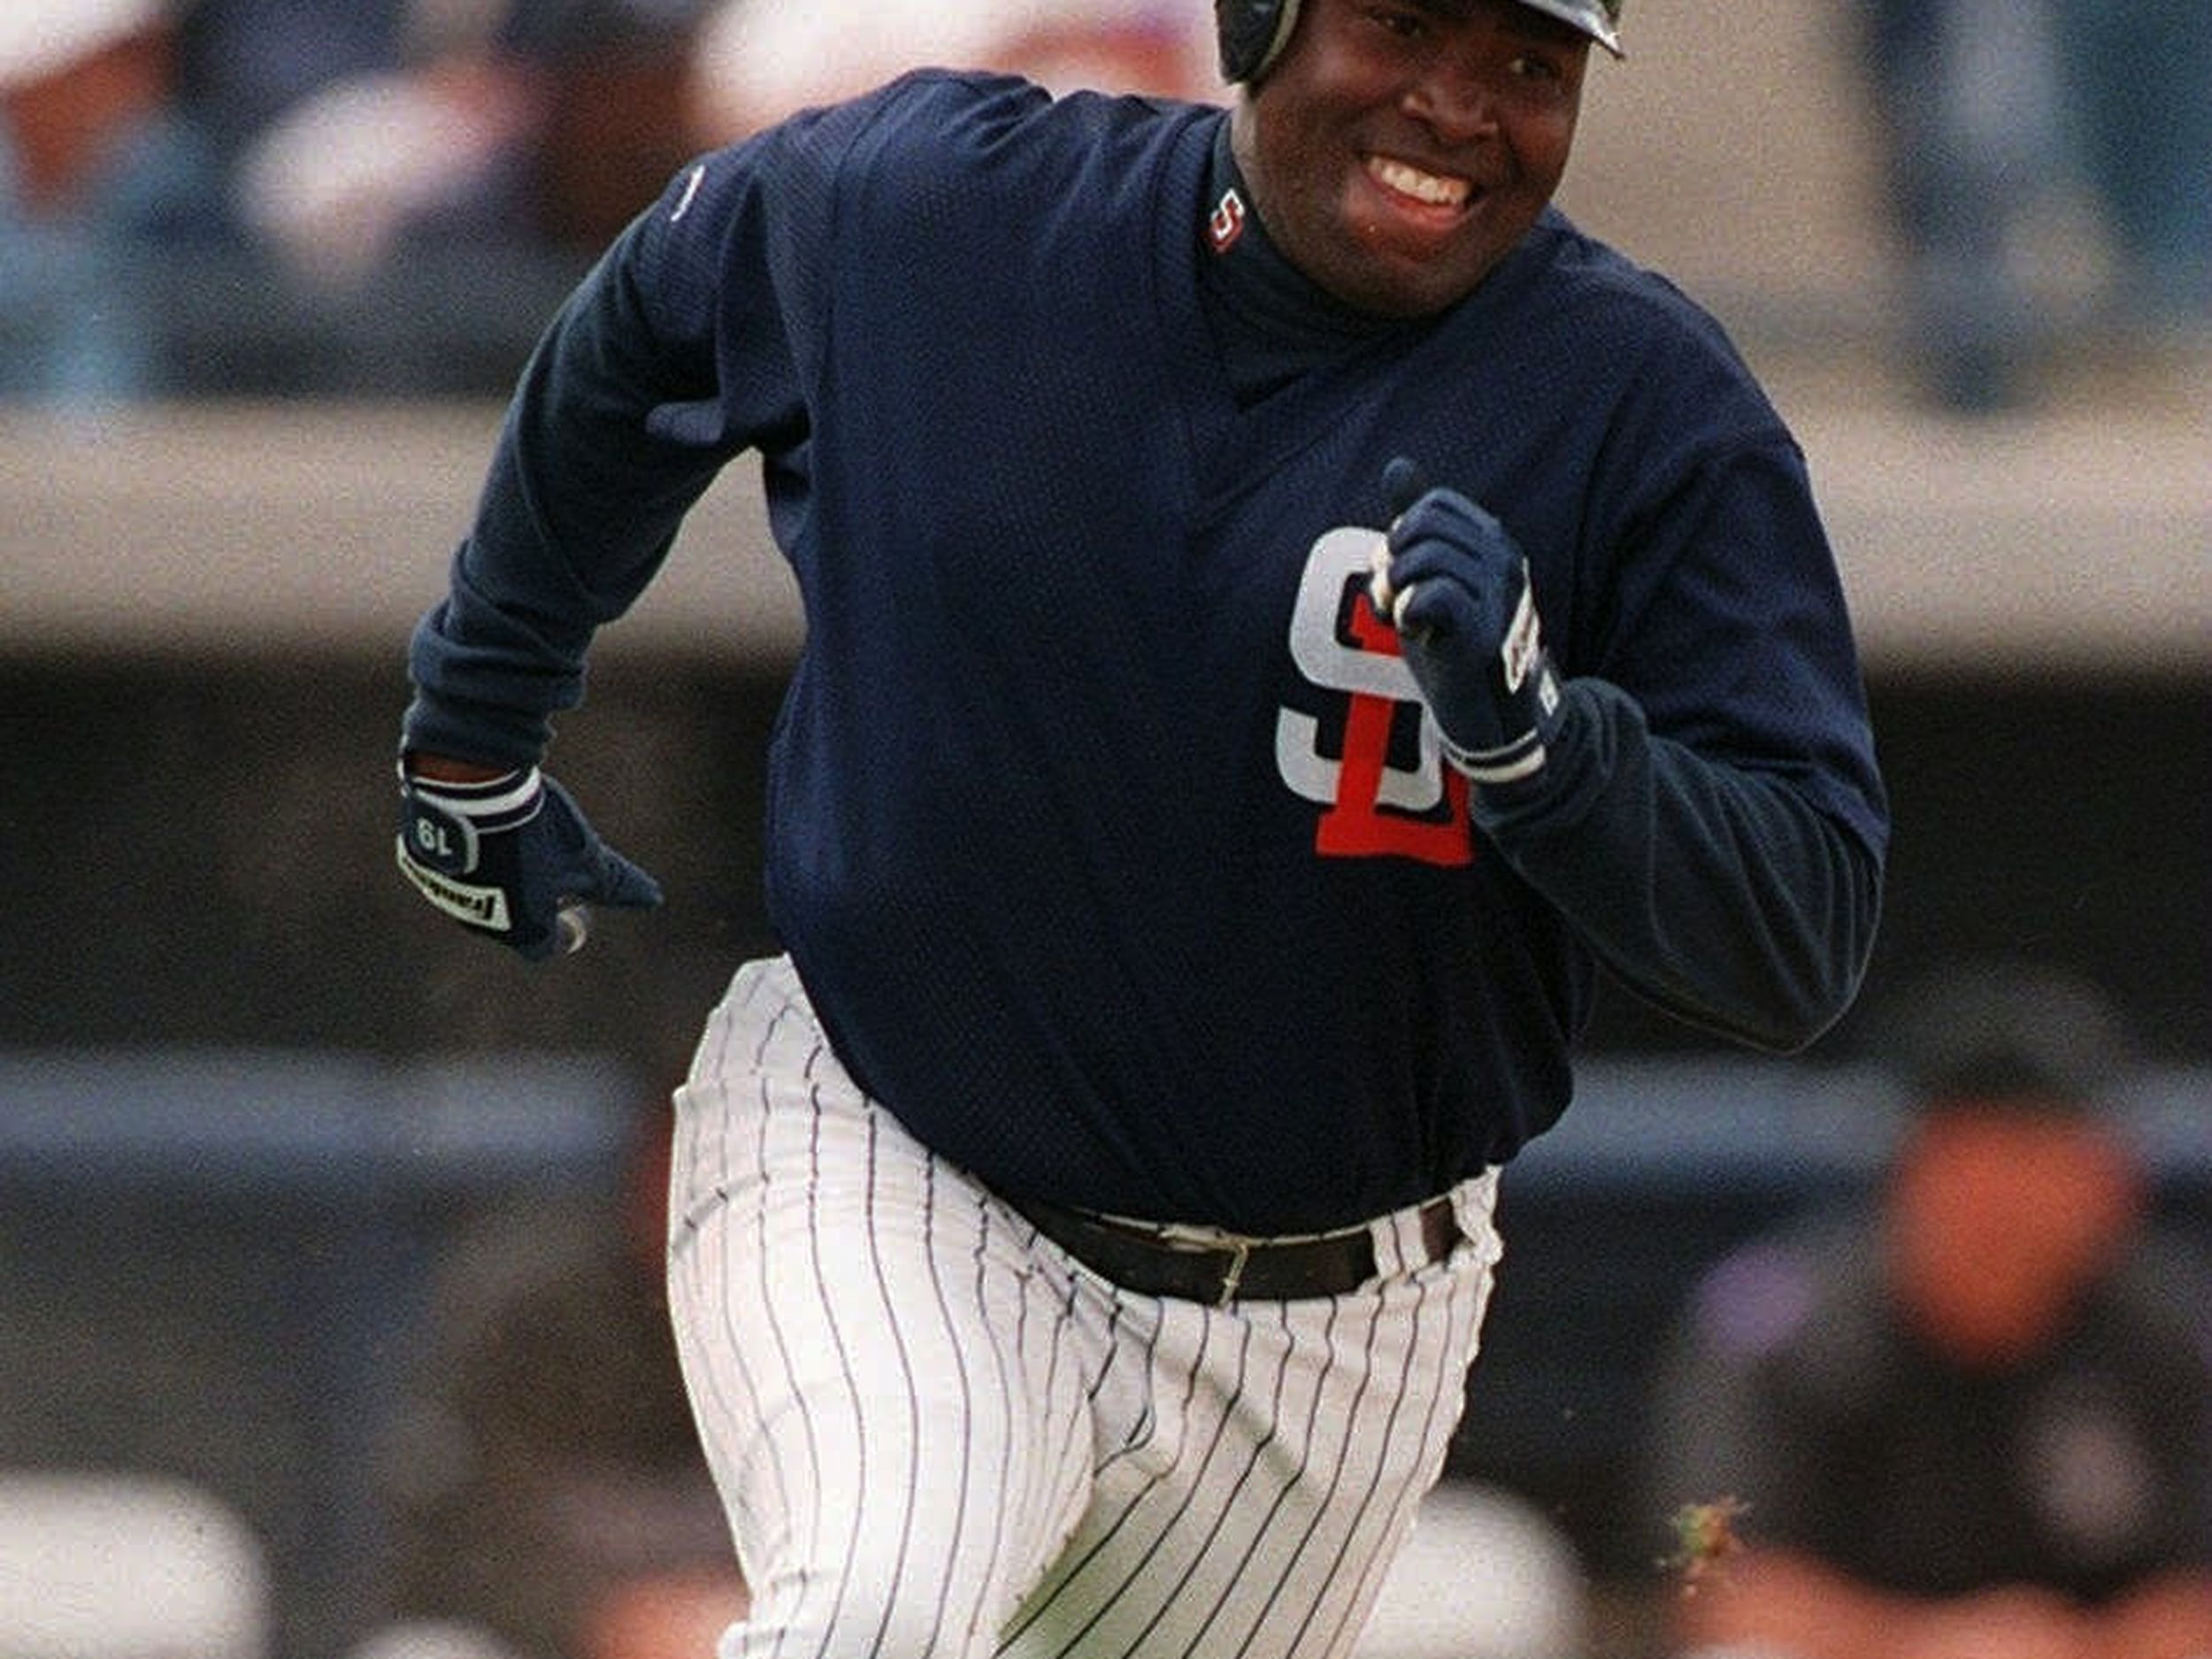 After Gwynn's death, area coaches to warn players about smokeless tobacco